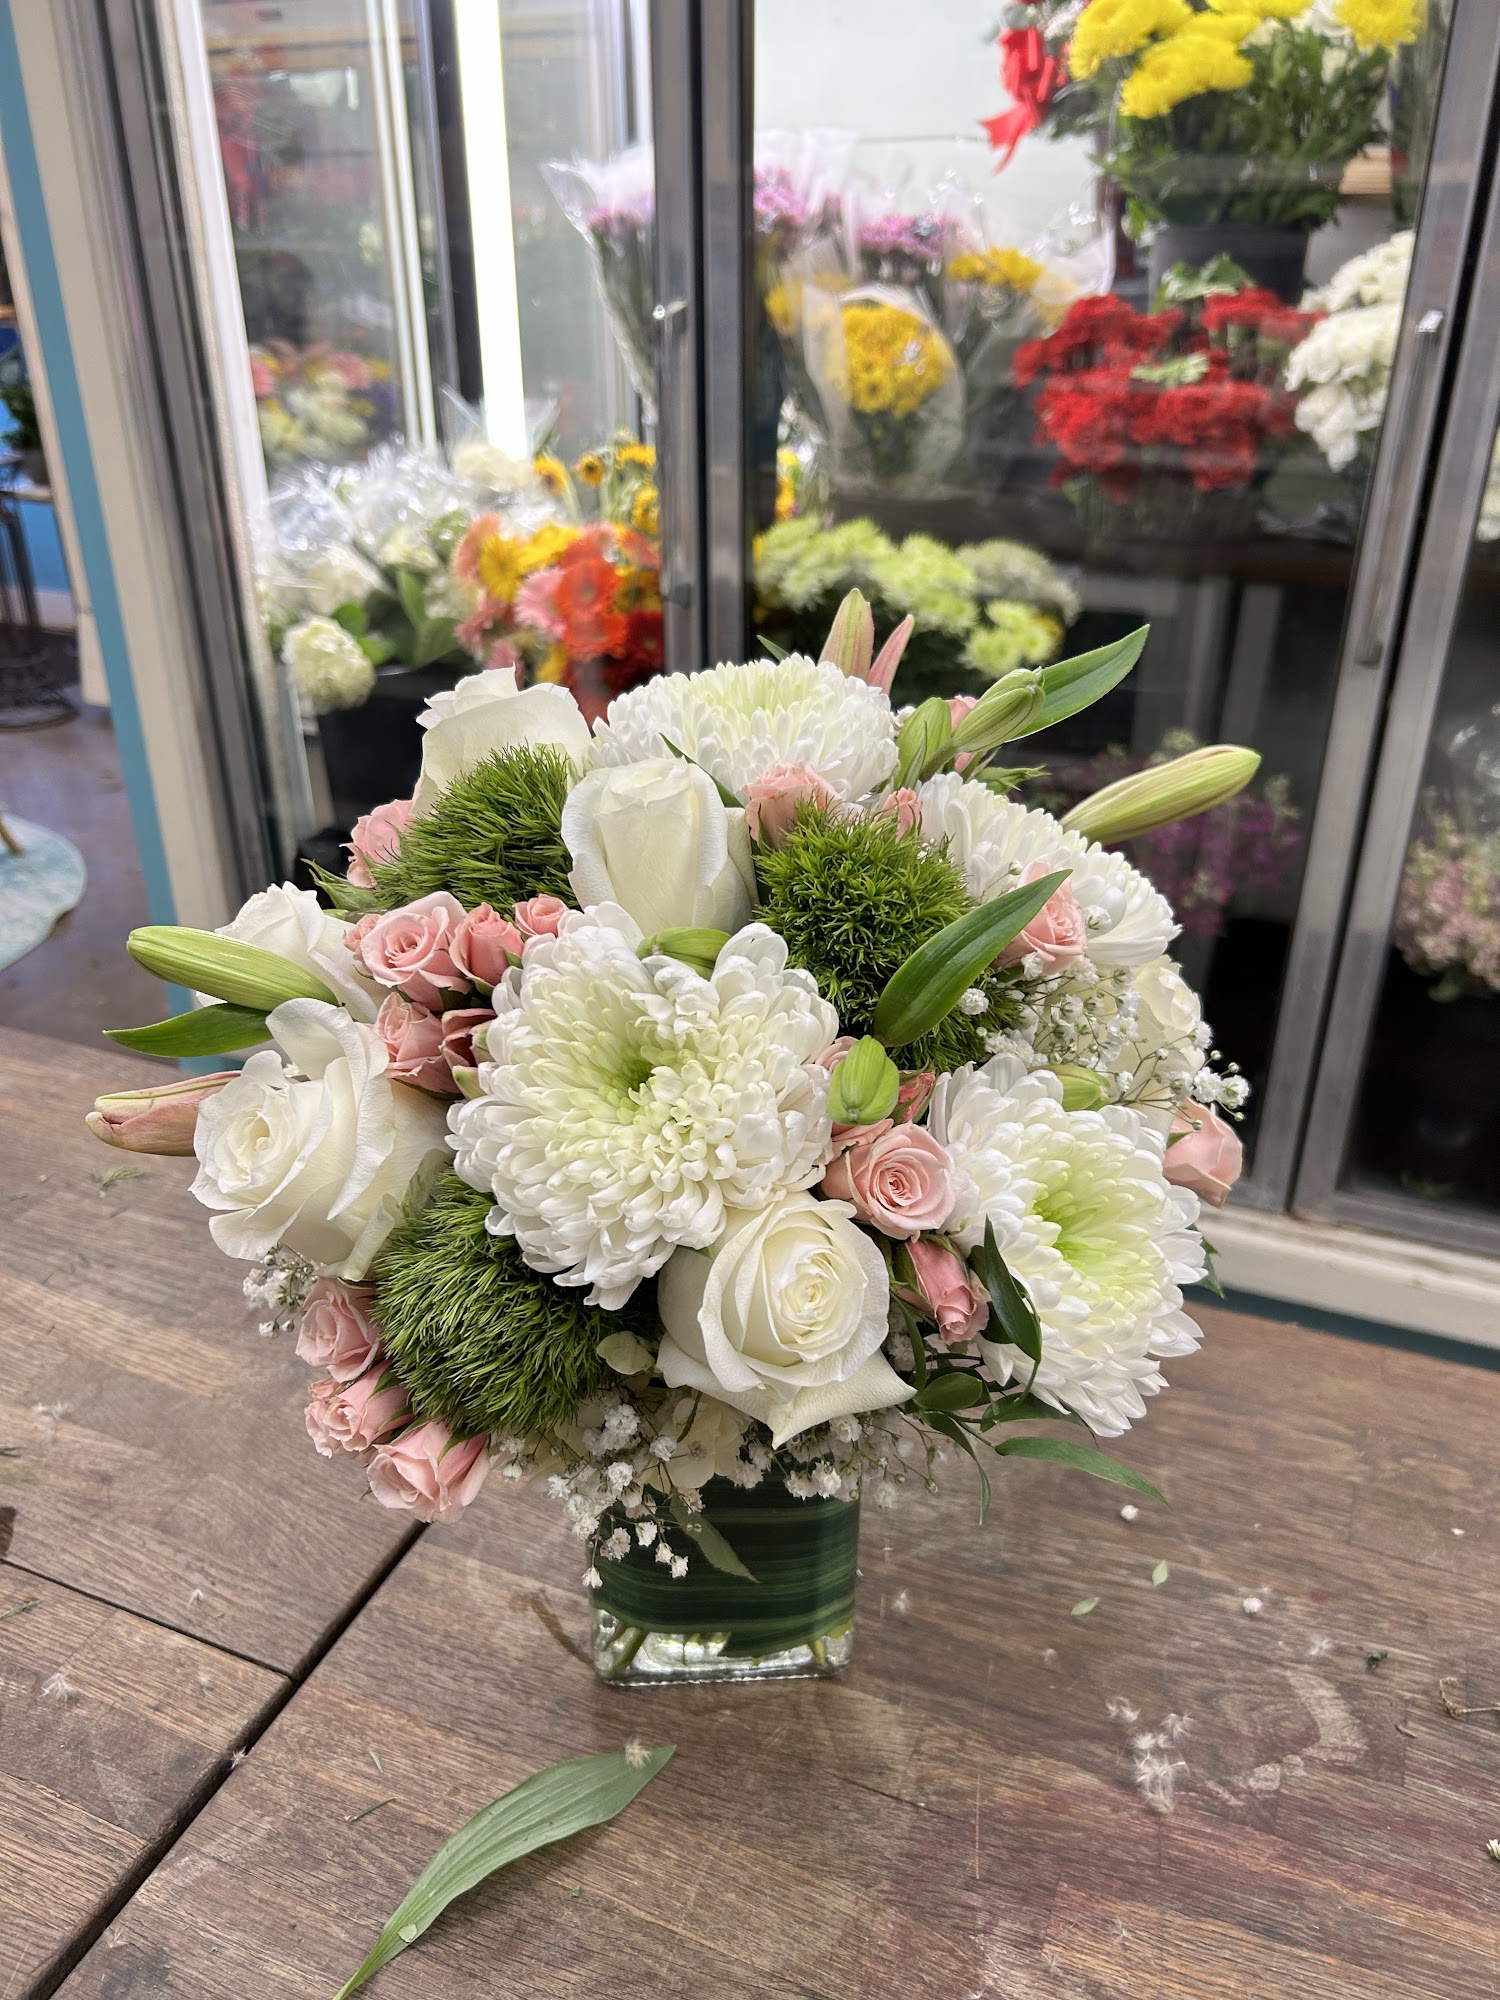 Bayville Florist Inc. Always Something Special